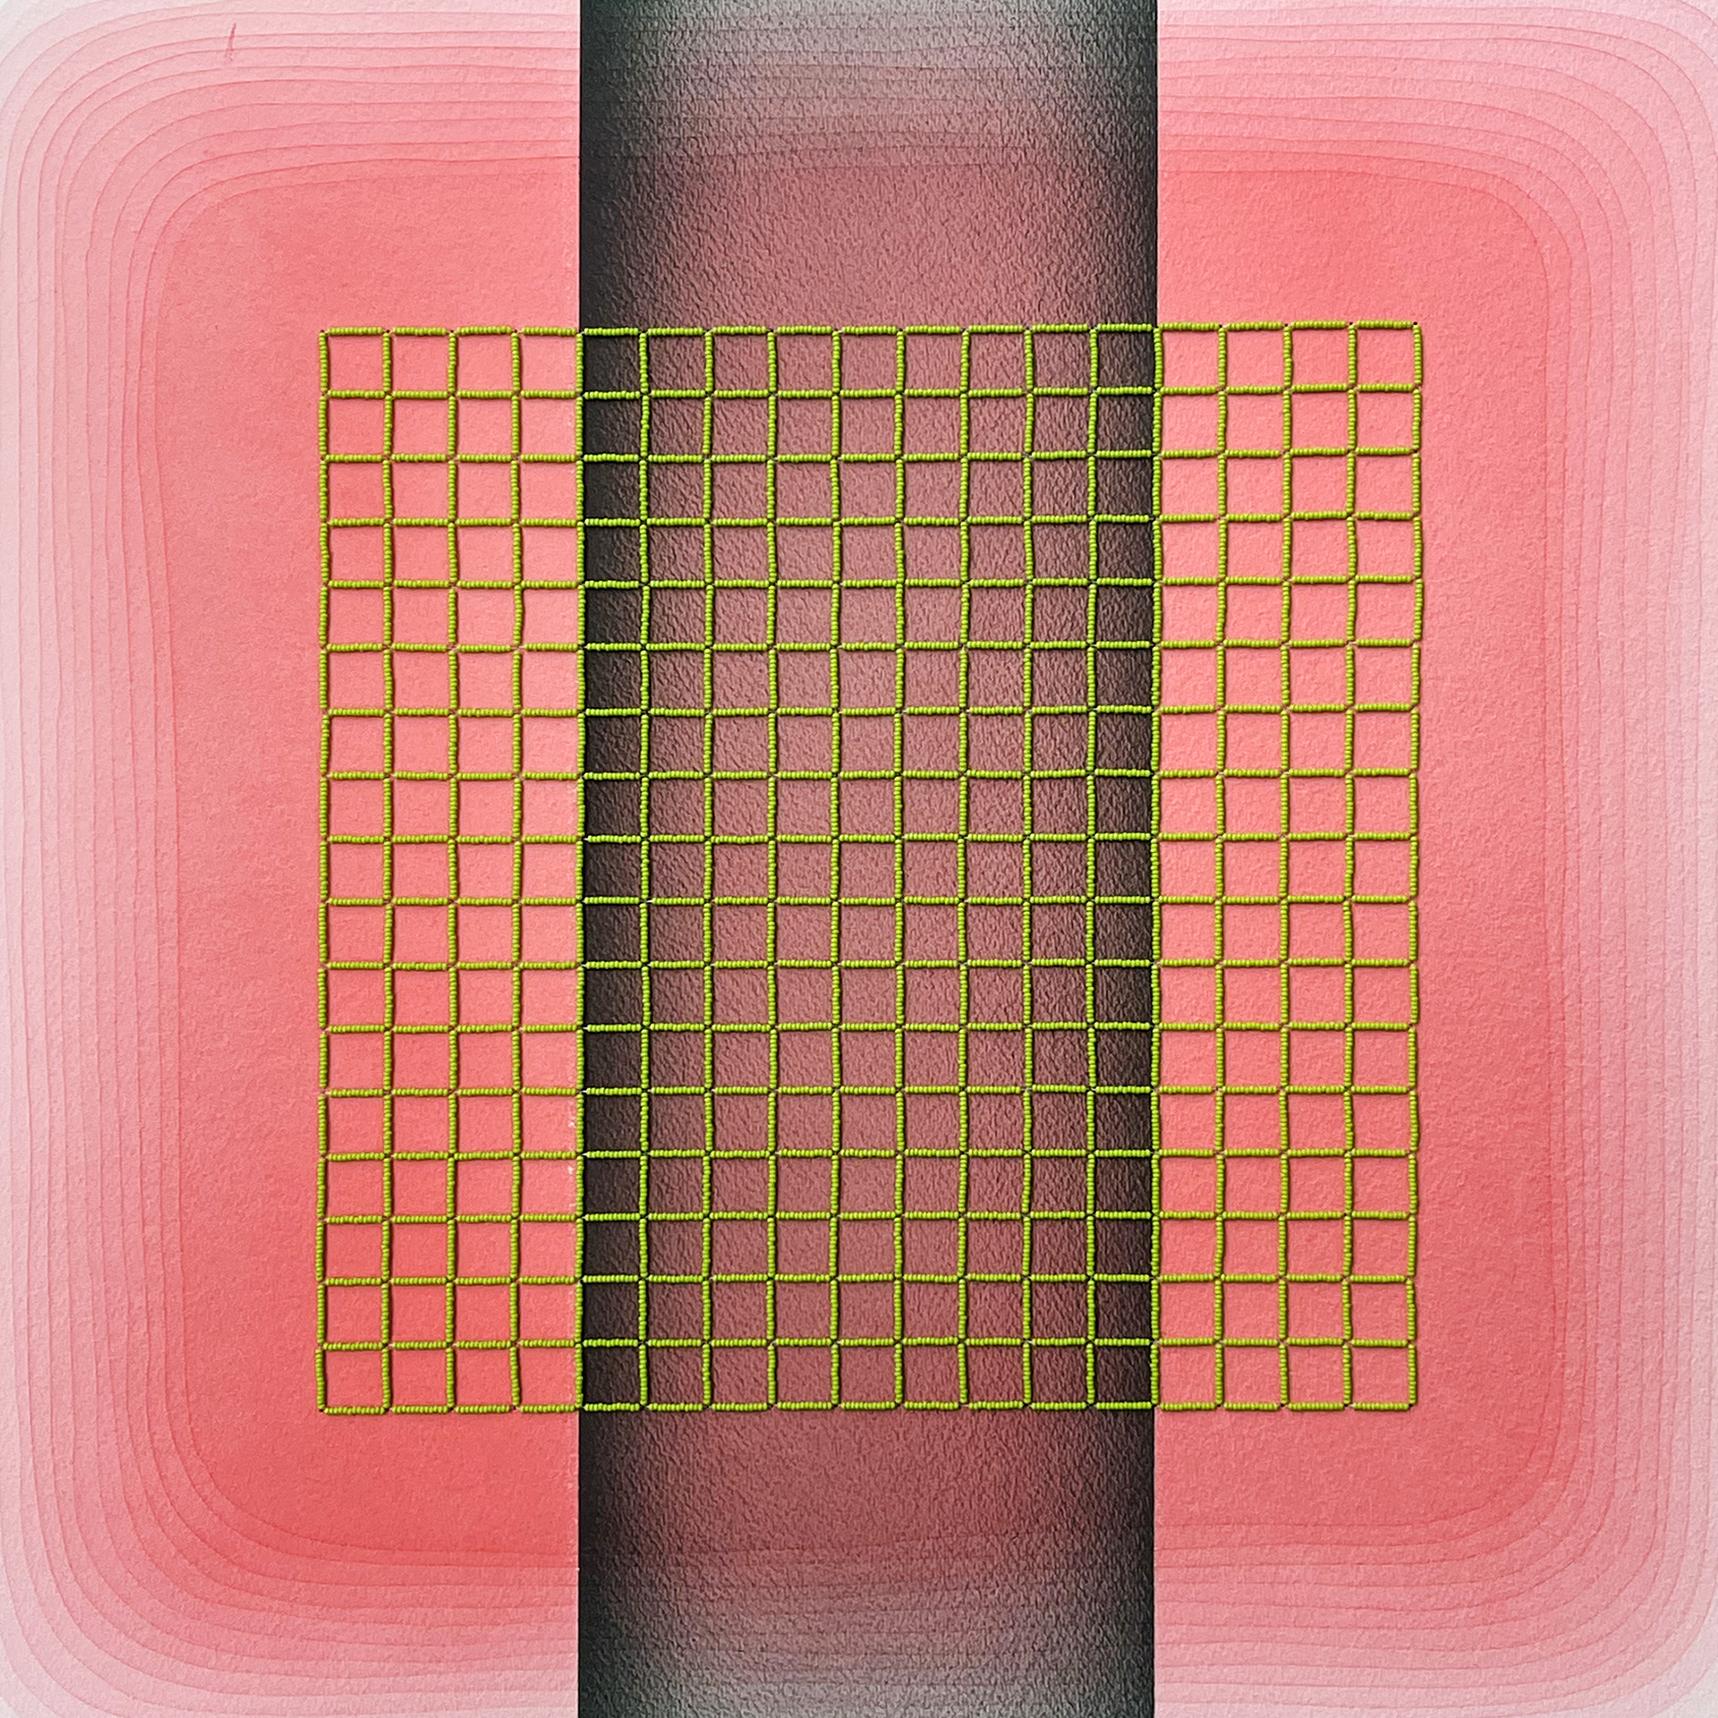 This piece features hues of pink and green.

Atlanta-based artist and designer Gretchen Wagner is influenced by the use of color and their interactions. Her most recent body of work, “Color Interactions IV,” challenges our ability to focus and